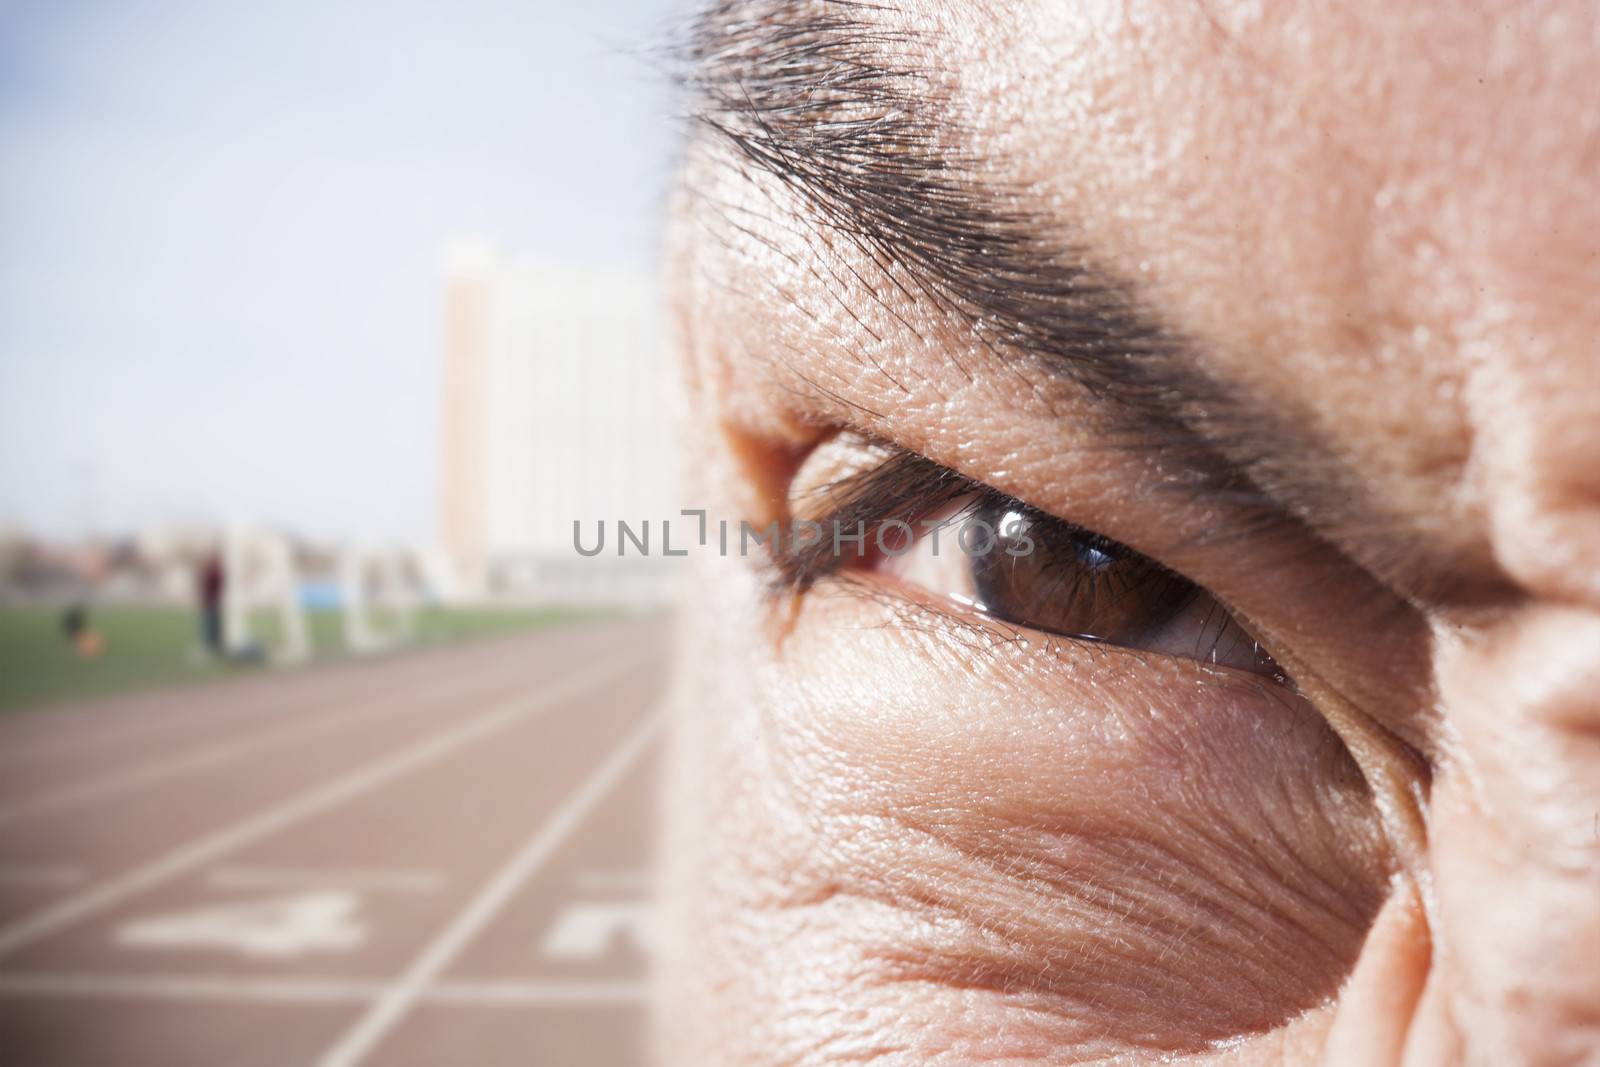 Athlete's eye with angry expression, close-up